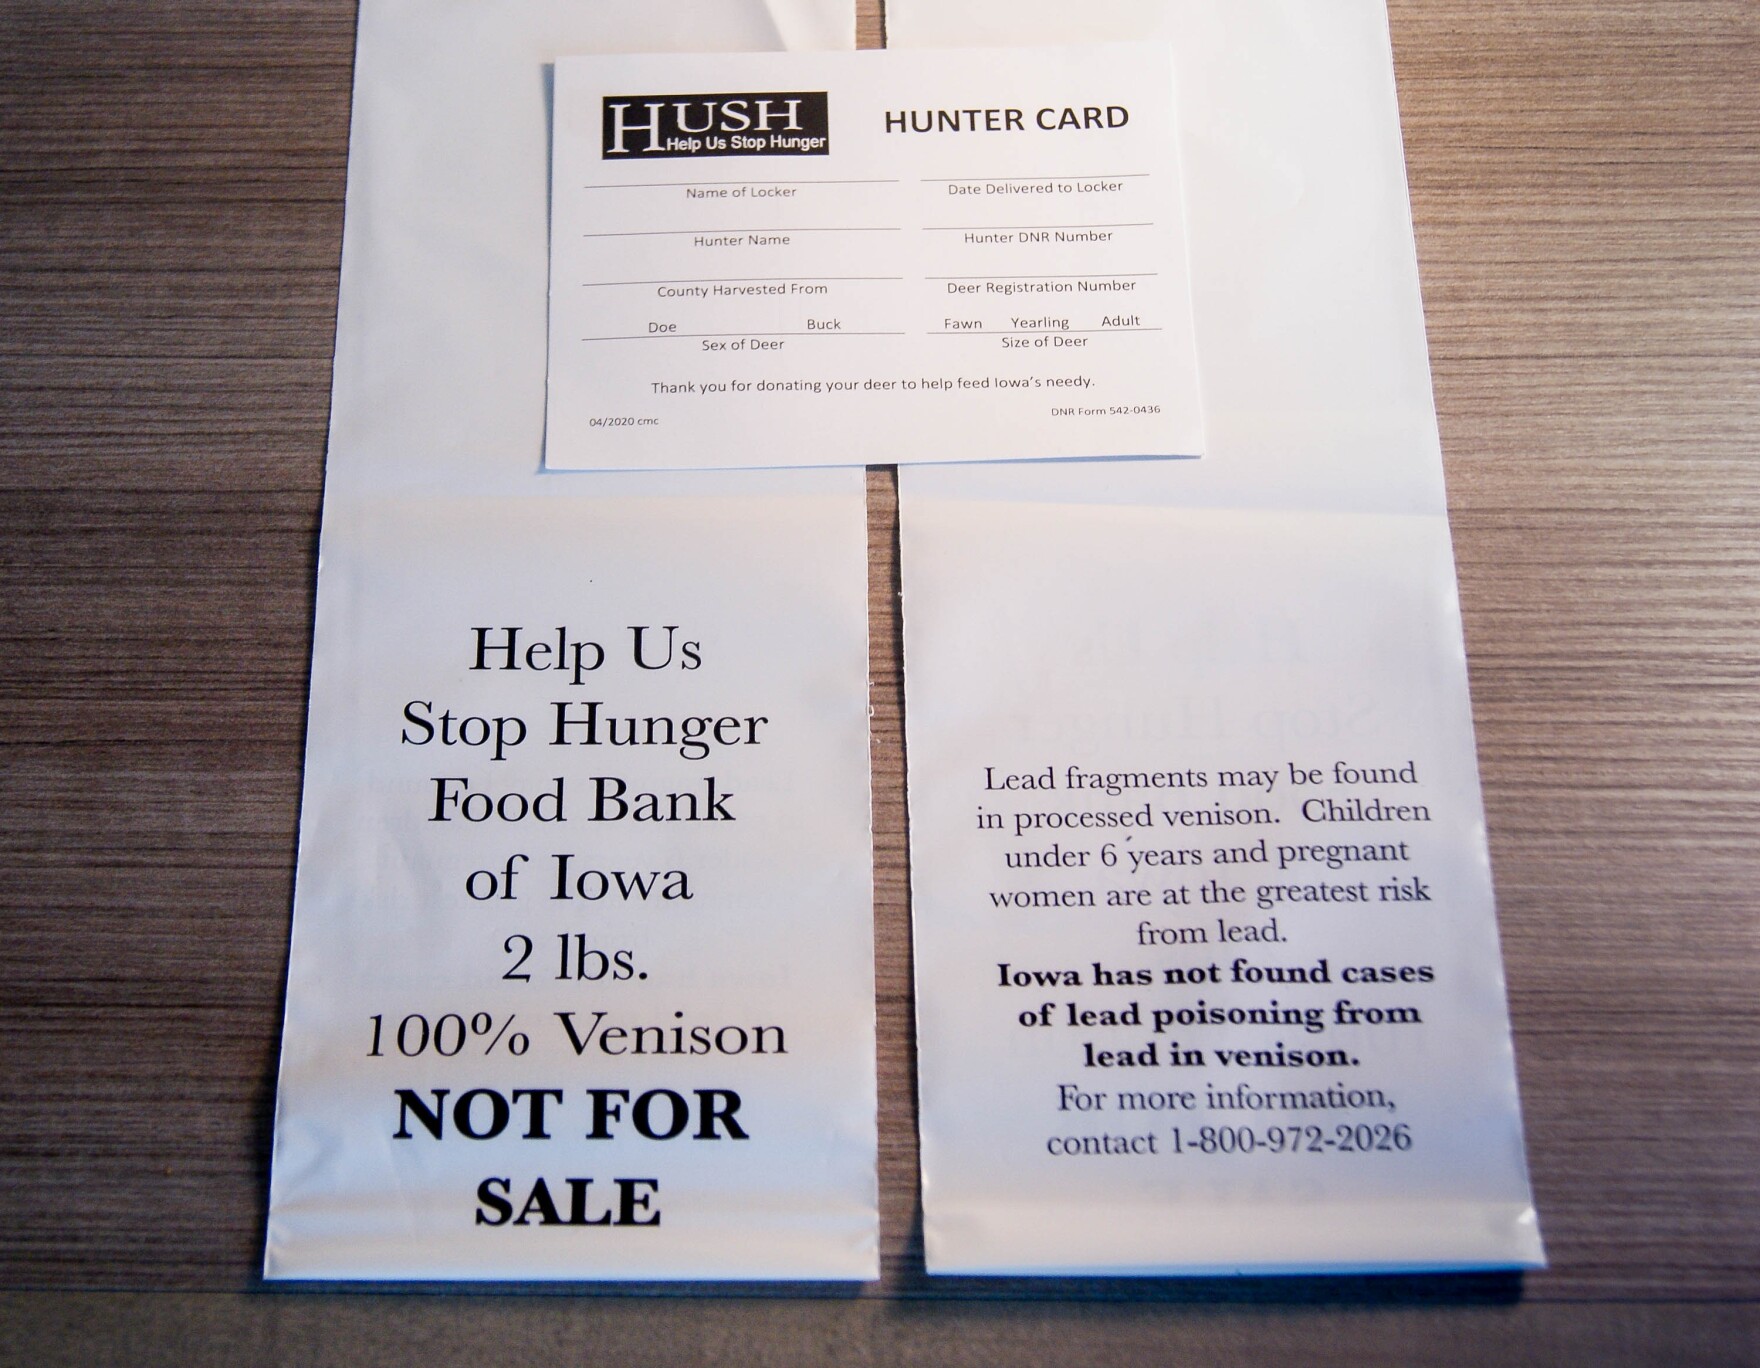 Two sheets of paper that read: "Help us stop hunger. Food Bank of Iowa, 2 lbs. 100% Venison NOT FOR SALE. Lying on top, a small piece of cardstock labeled "Hunter Card"